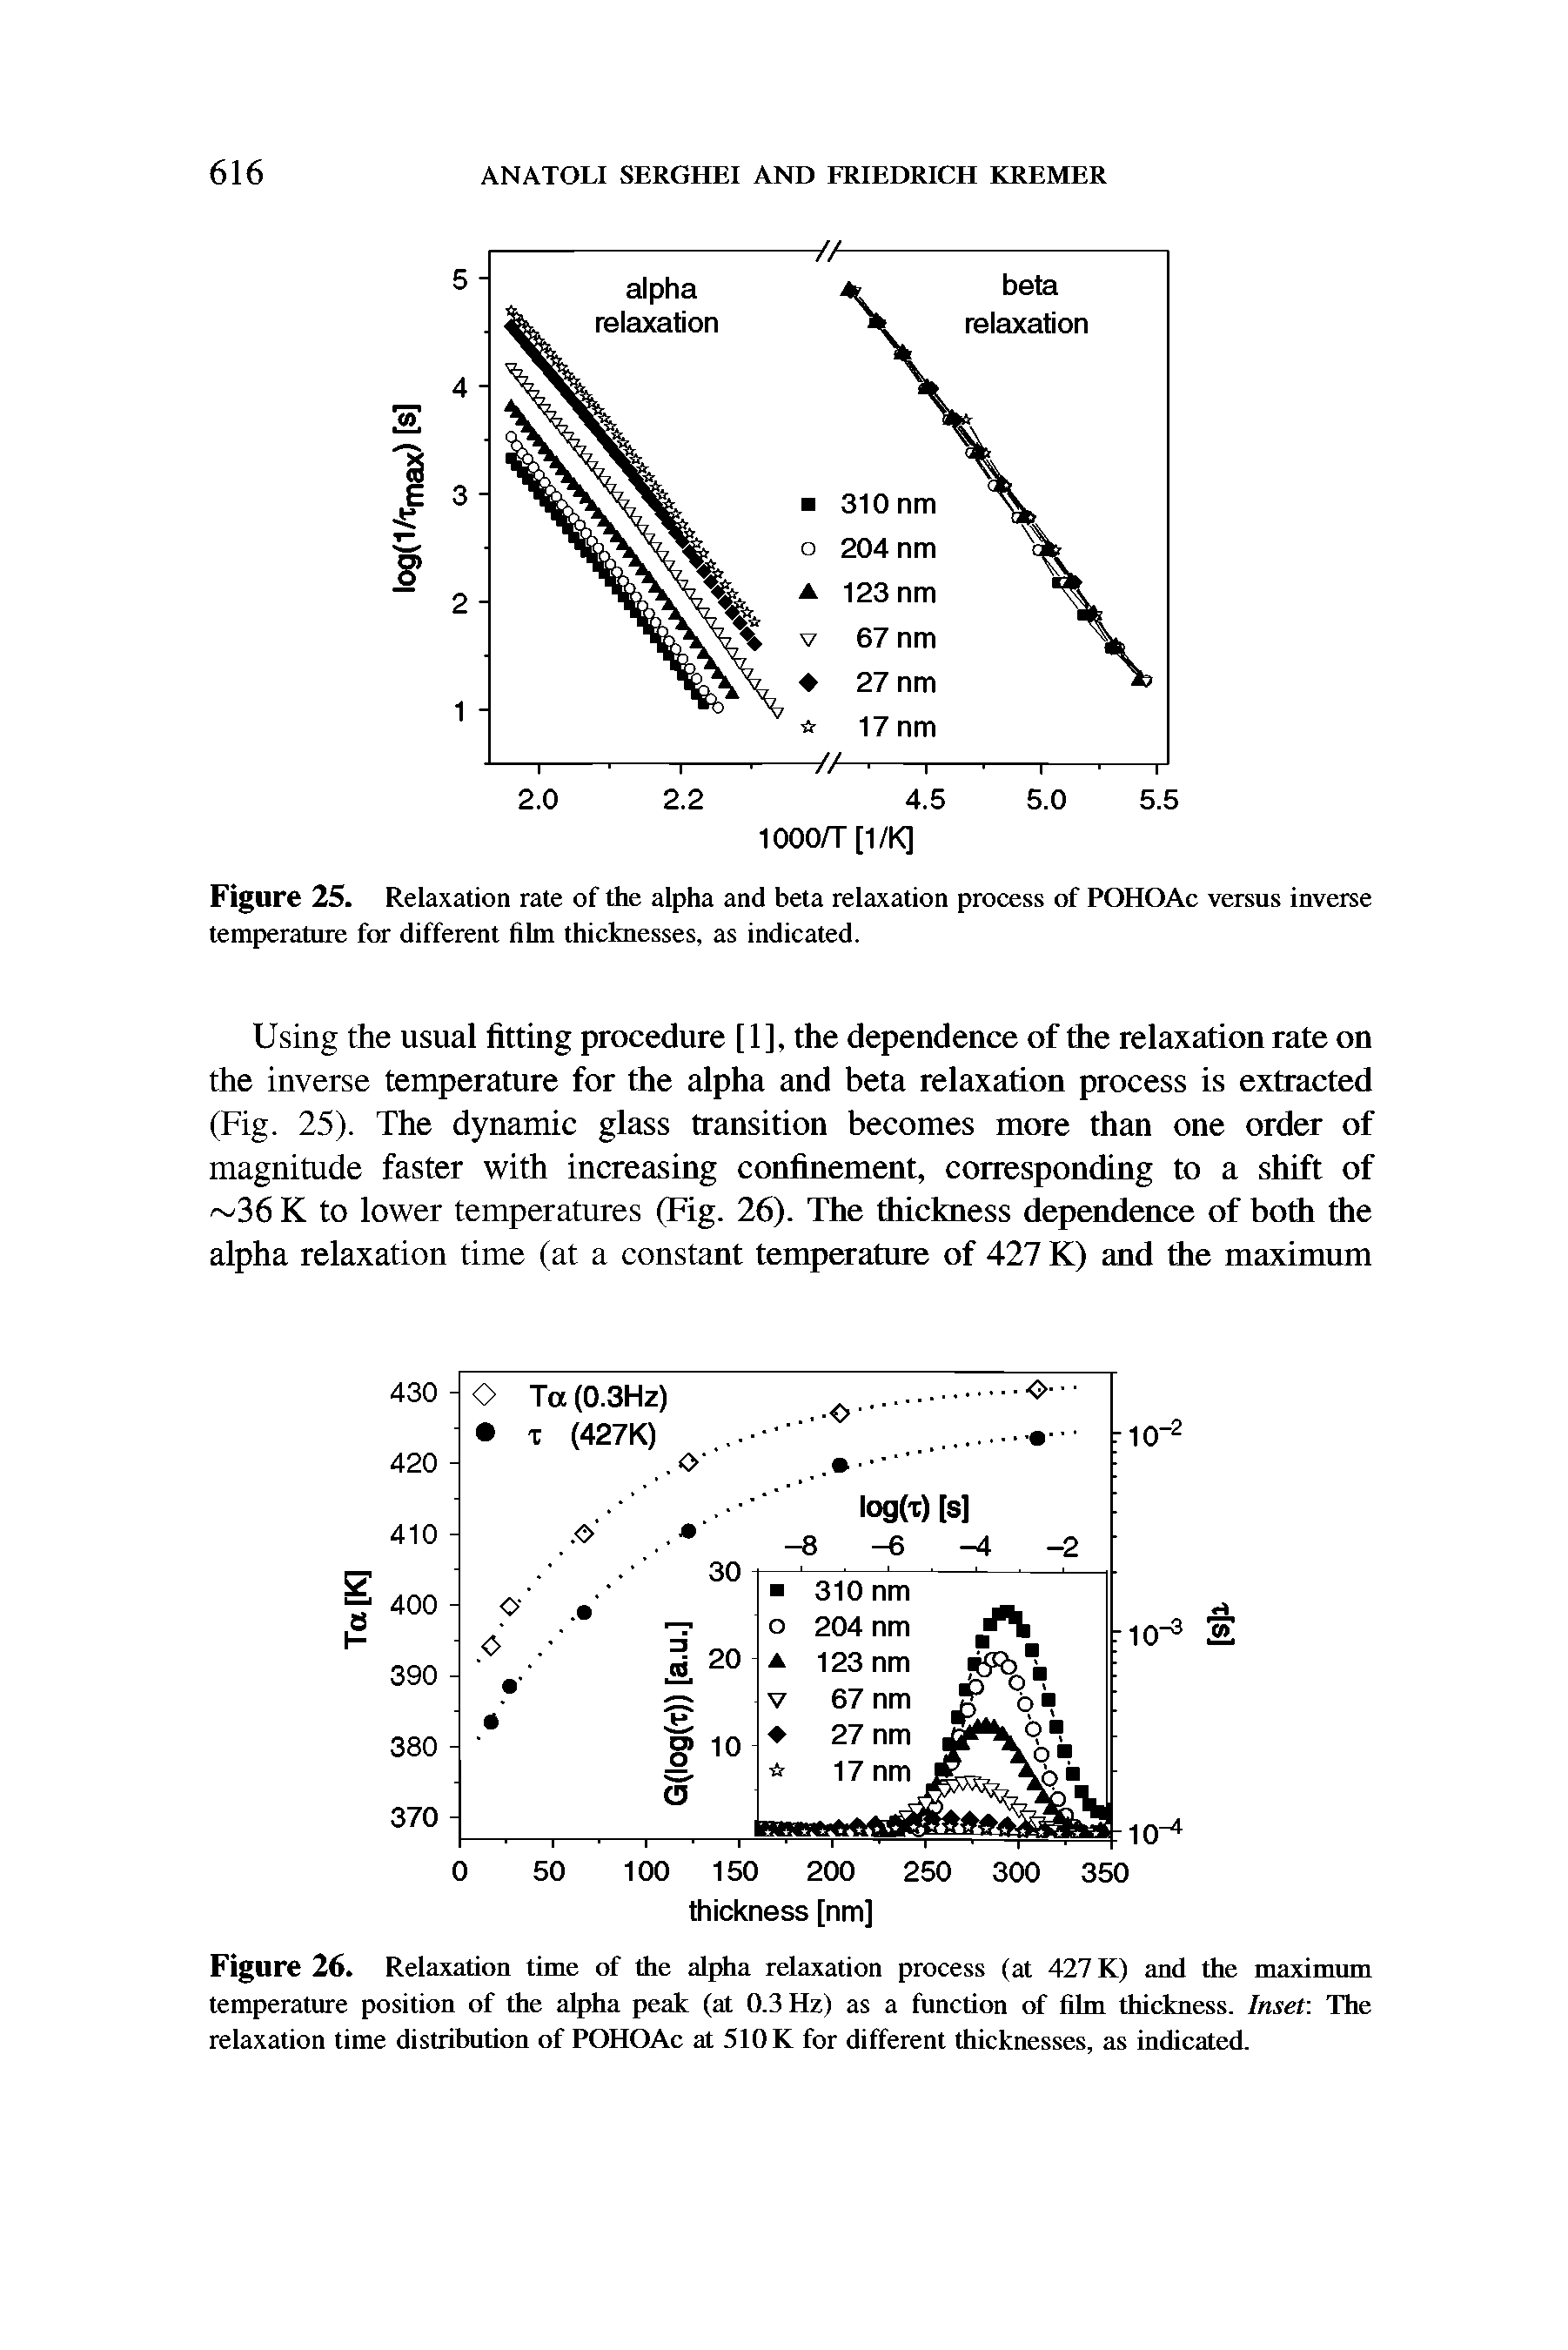 Figure 26. Relaxation time of the alpha relaxation process (at 427 K) and the maximum temperature position of the alpha peak (at 0.3 Hz) as a function of film thickness. Inset The relaxation time distribution of POHOAc at 510 K for different thicknesses, as indicated.